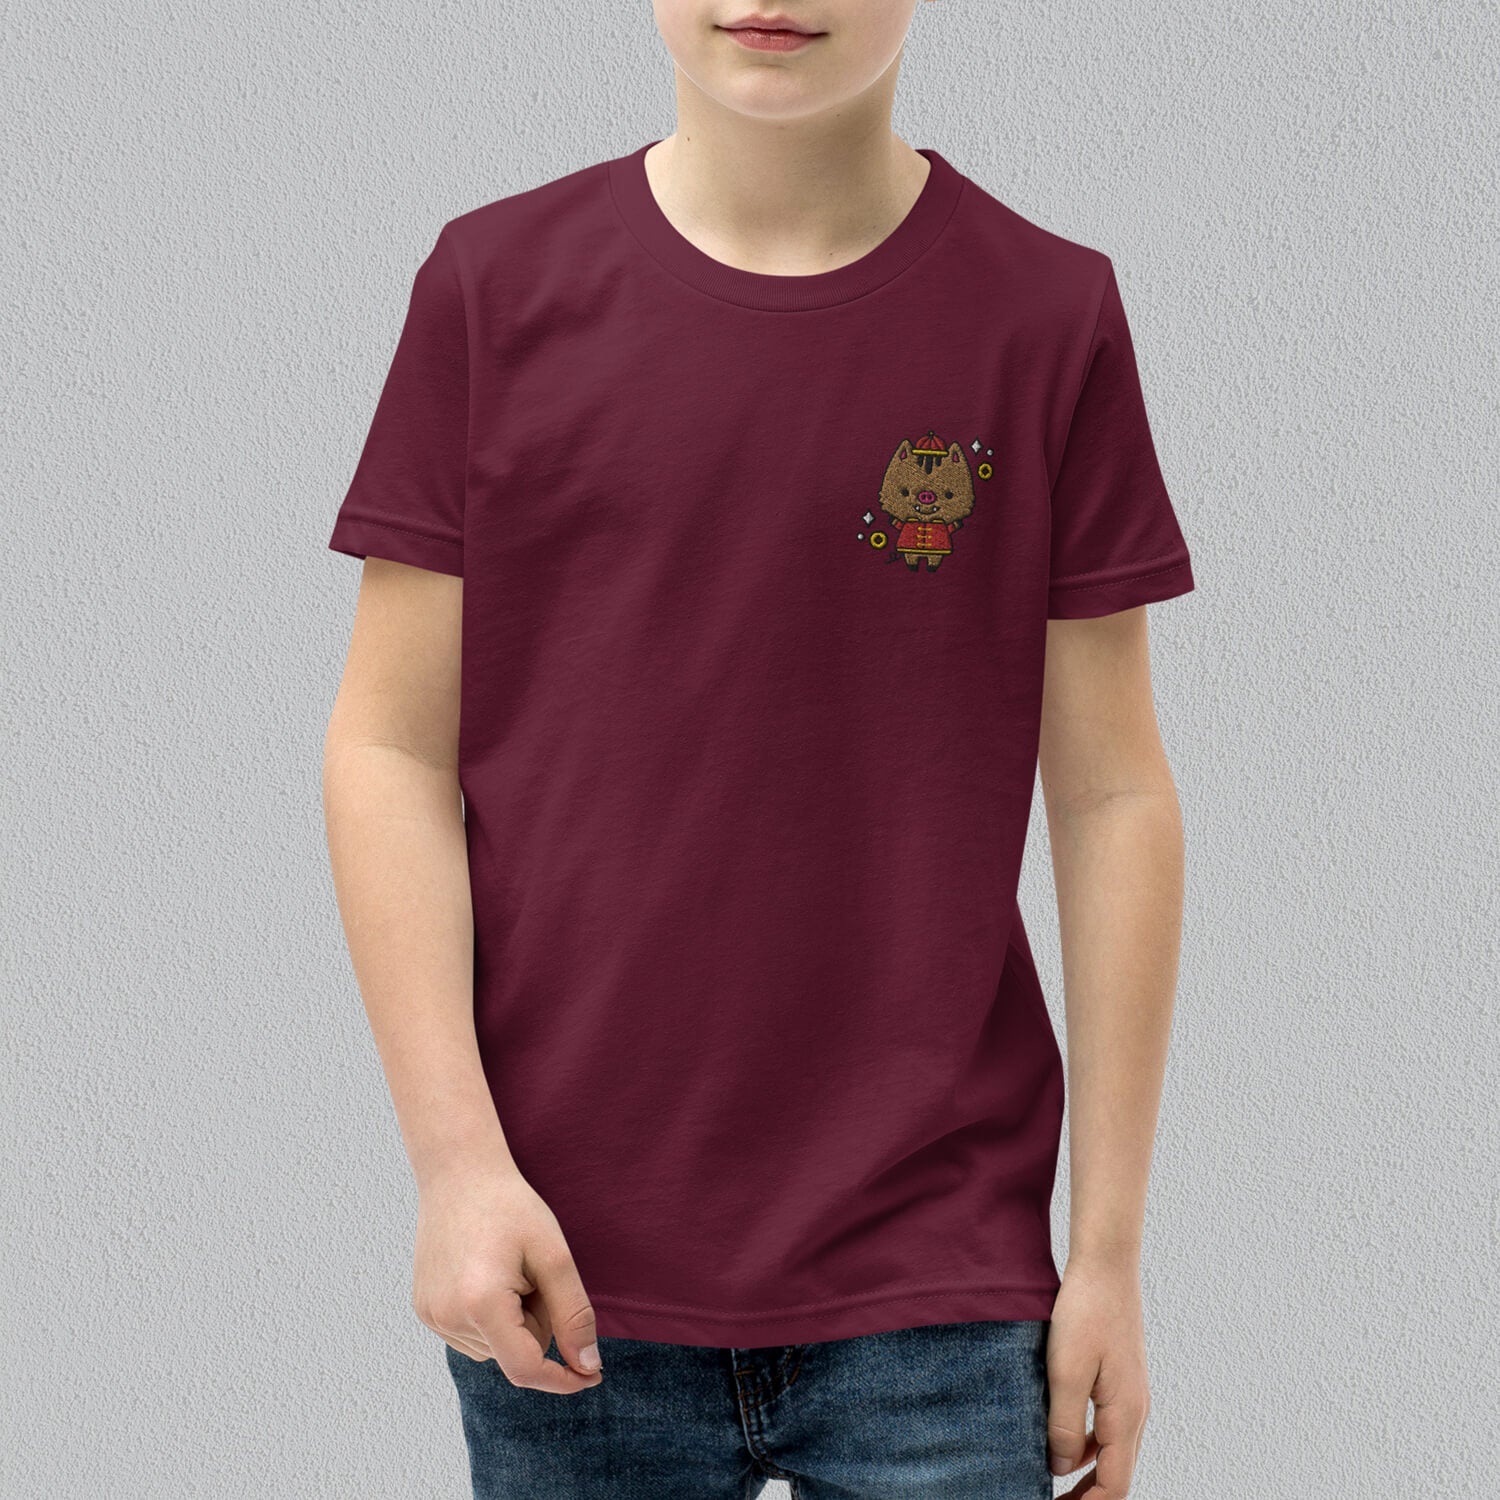 Year of the Pig Embroidered Kids T-Shirt - Ni De Mama Chinese Clothing